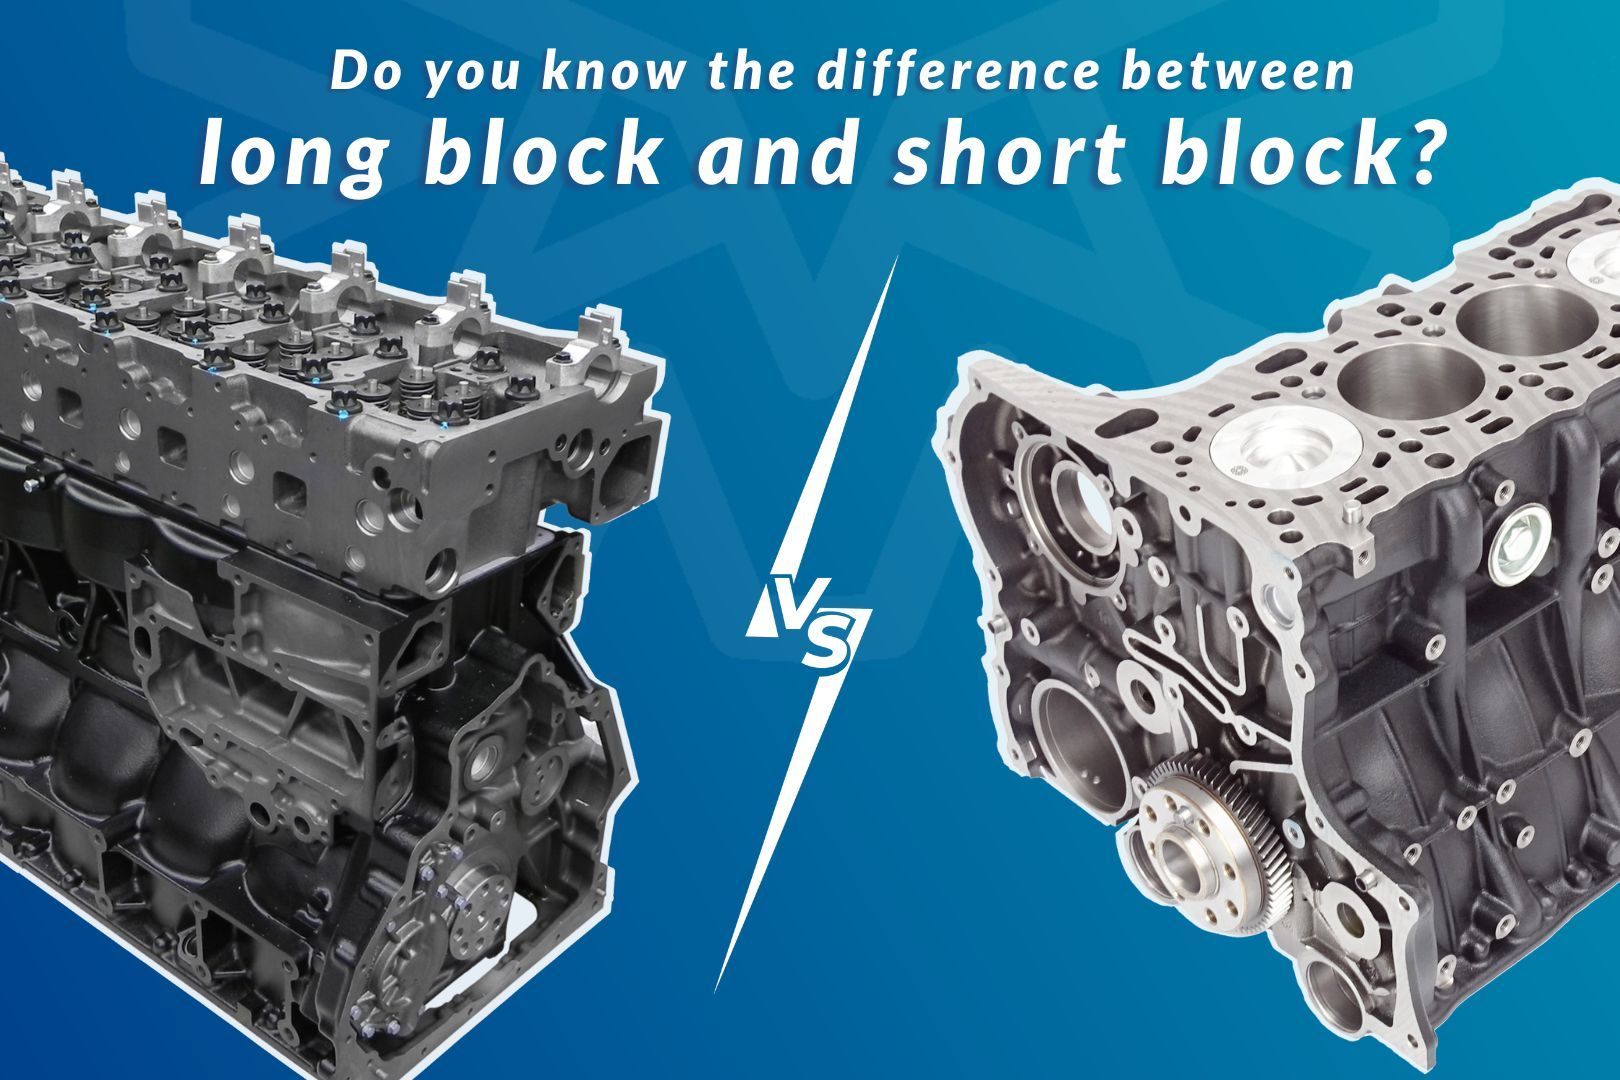 Do you know the difference between long block and short block?